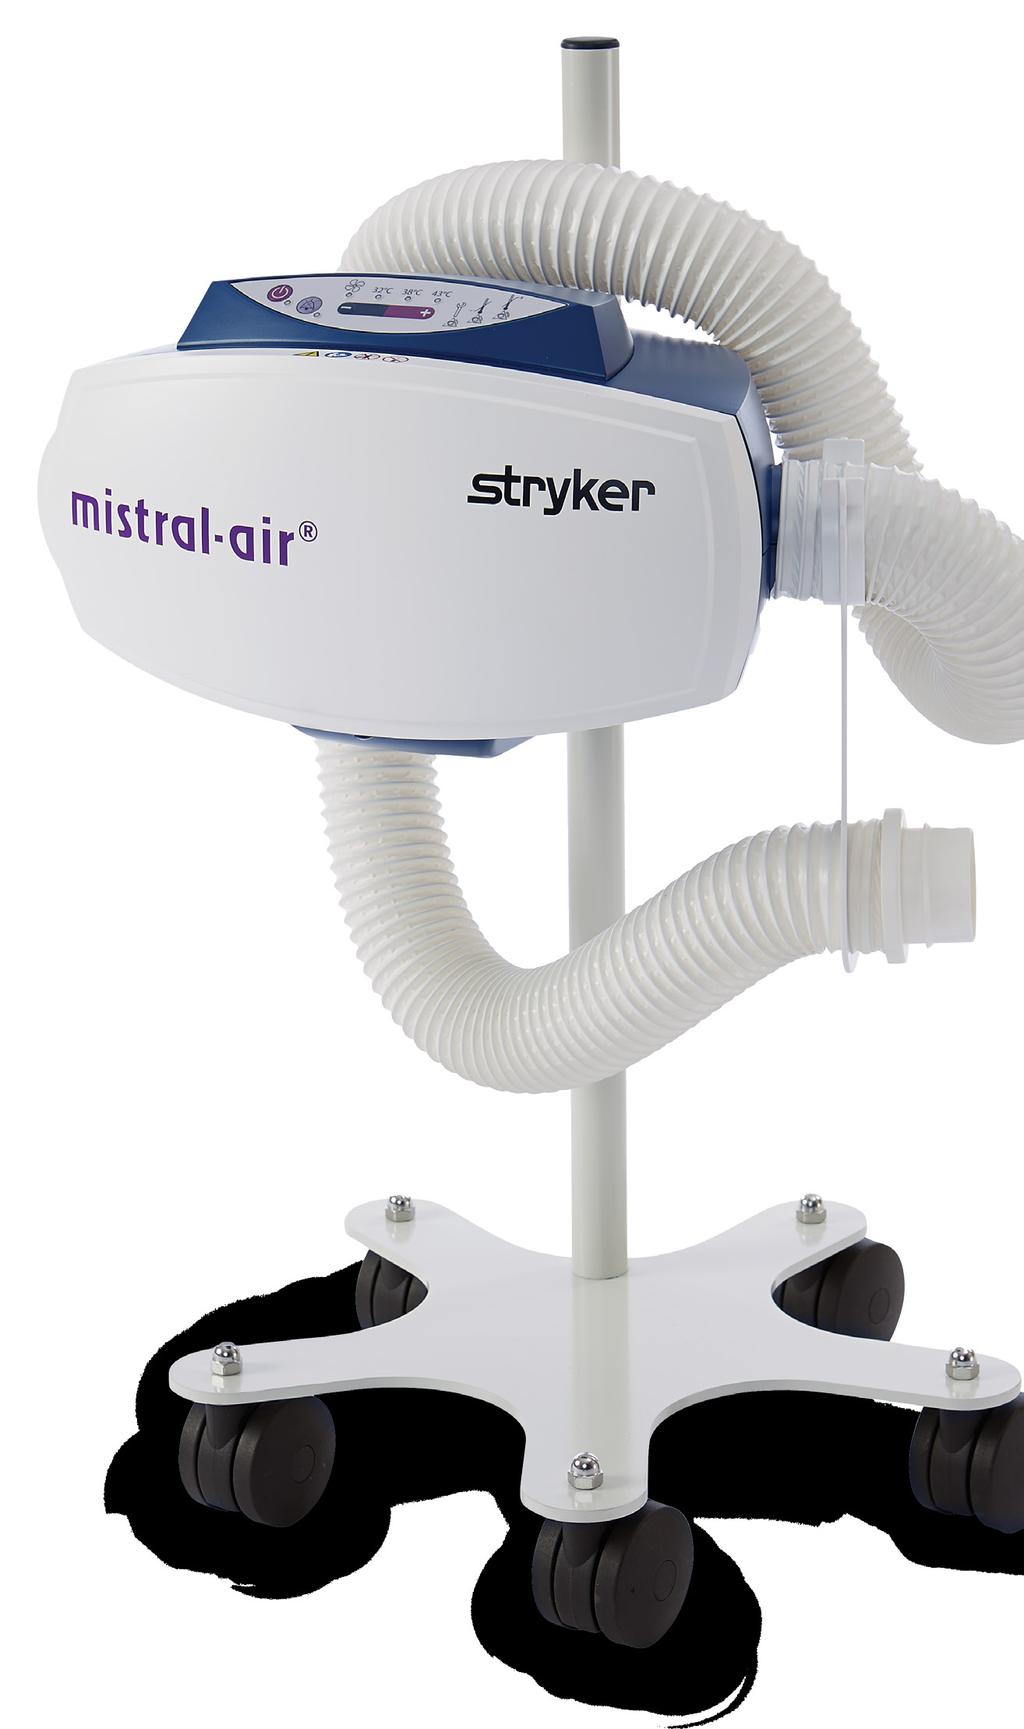 Mistral-Air Forced Air Warming System Optimized warming The Mistral-Air Forced Air Warming System is uniquely designed to serve as a solution that optimizes patient